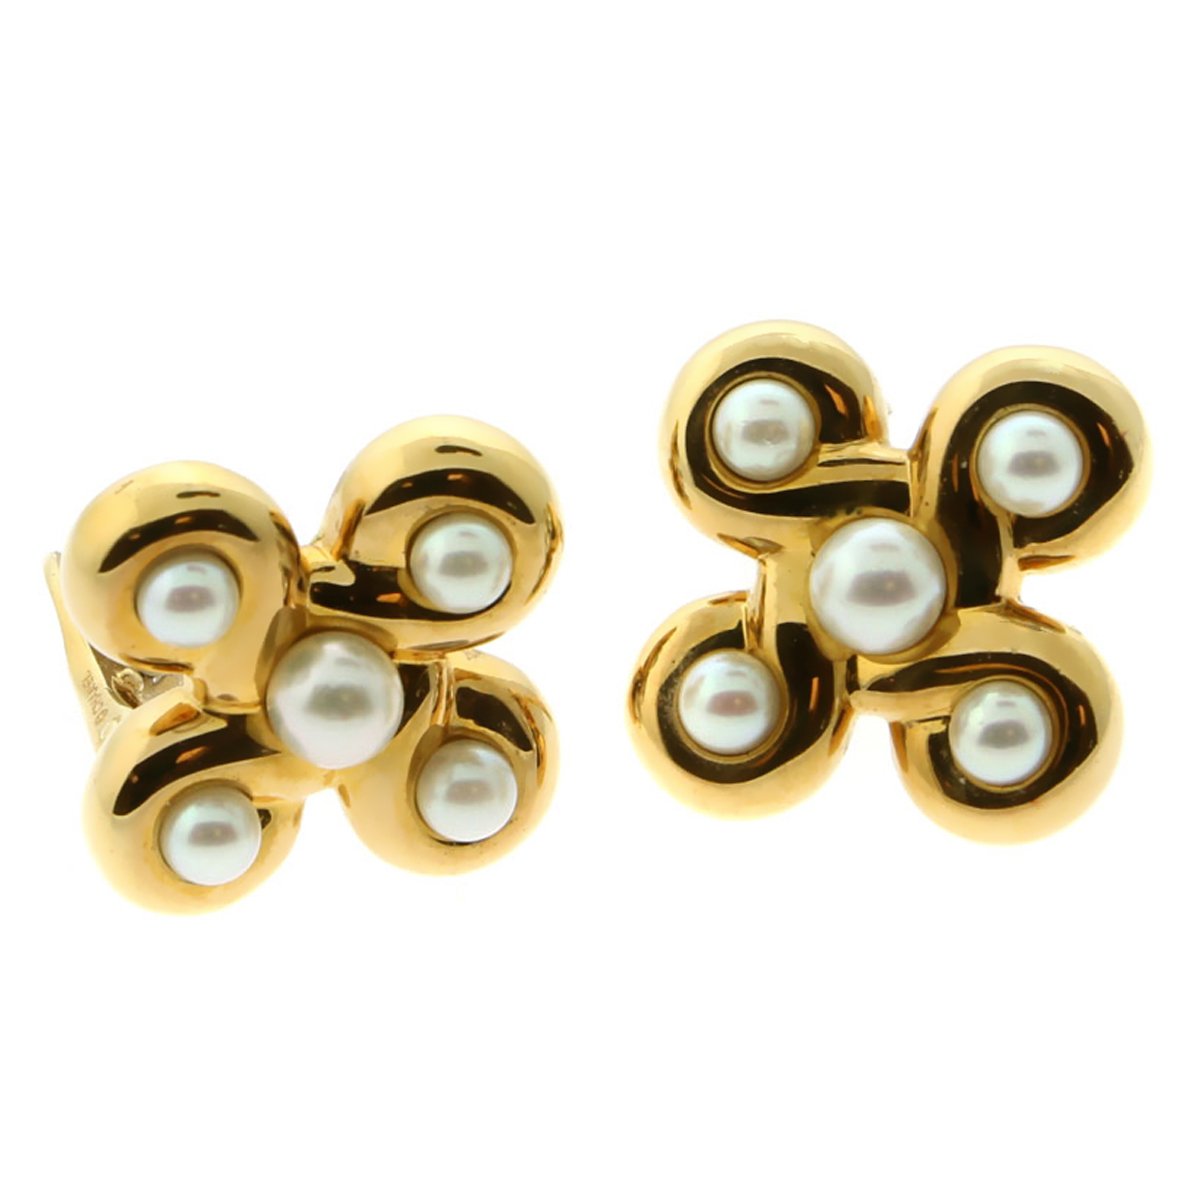 Earrings Chanel Yellow in Gold plated - 35910770